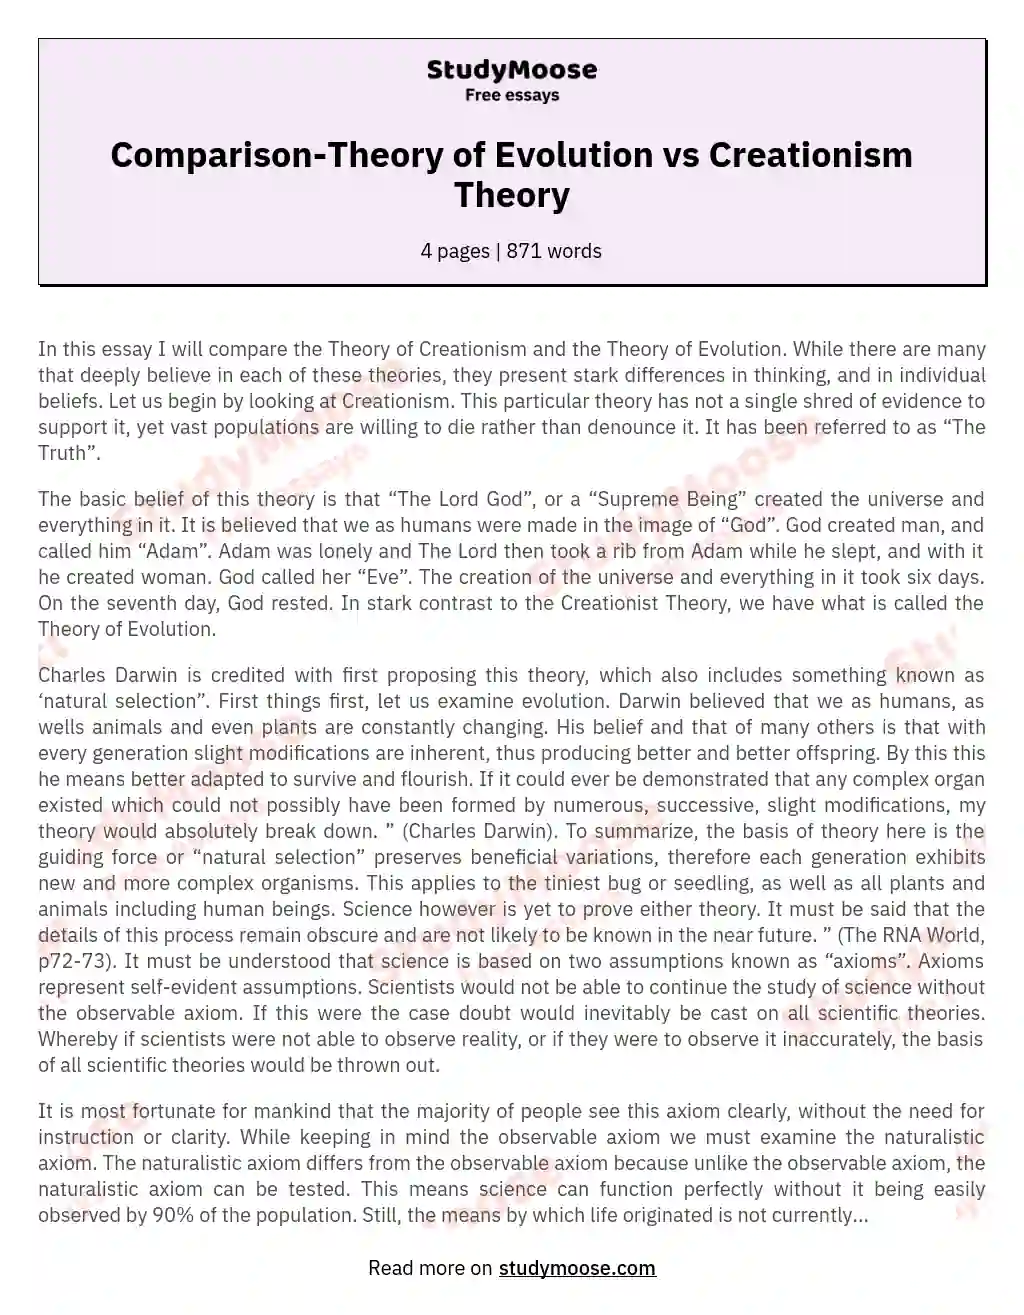 Comparison-Theory of Evolution vs Creationism Theory essay